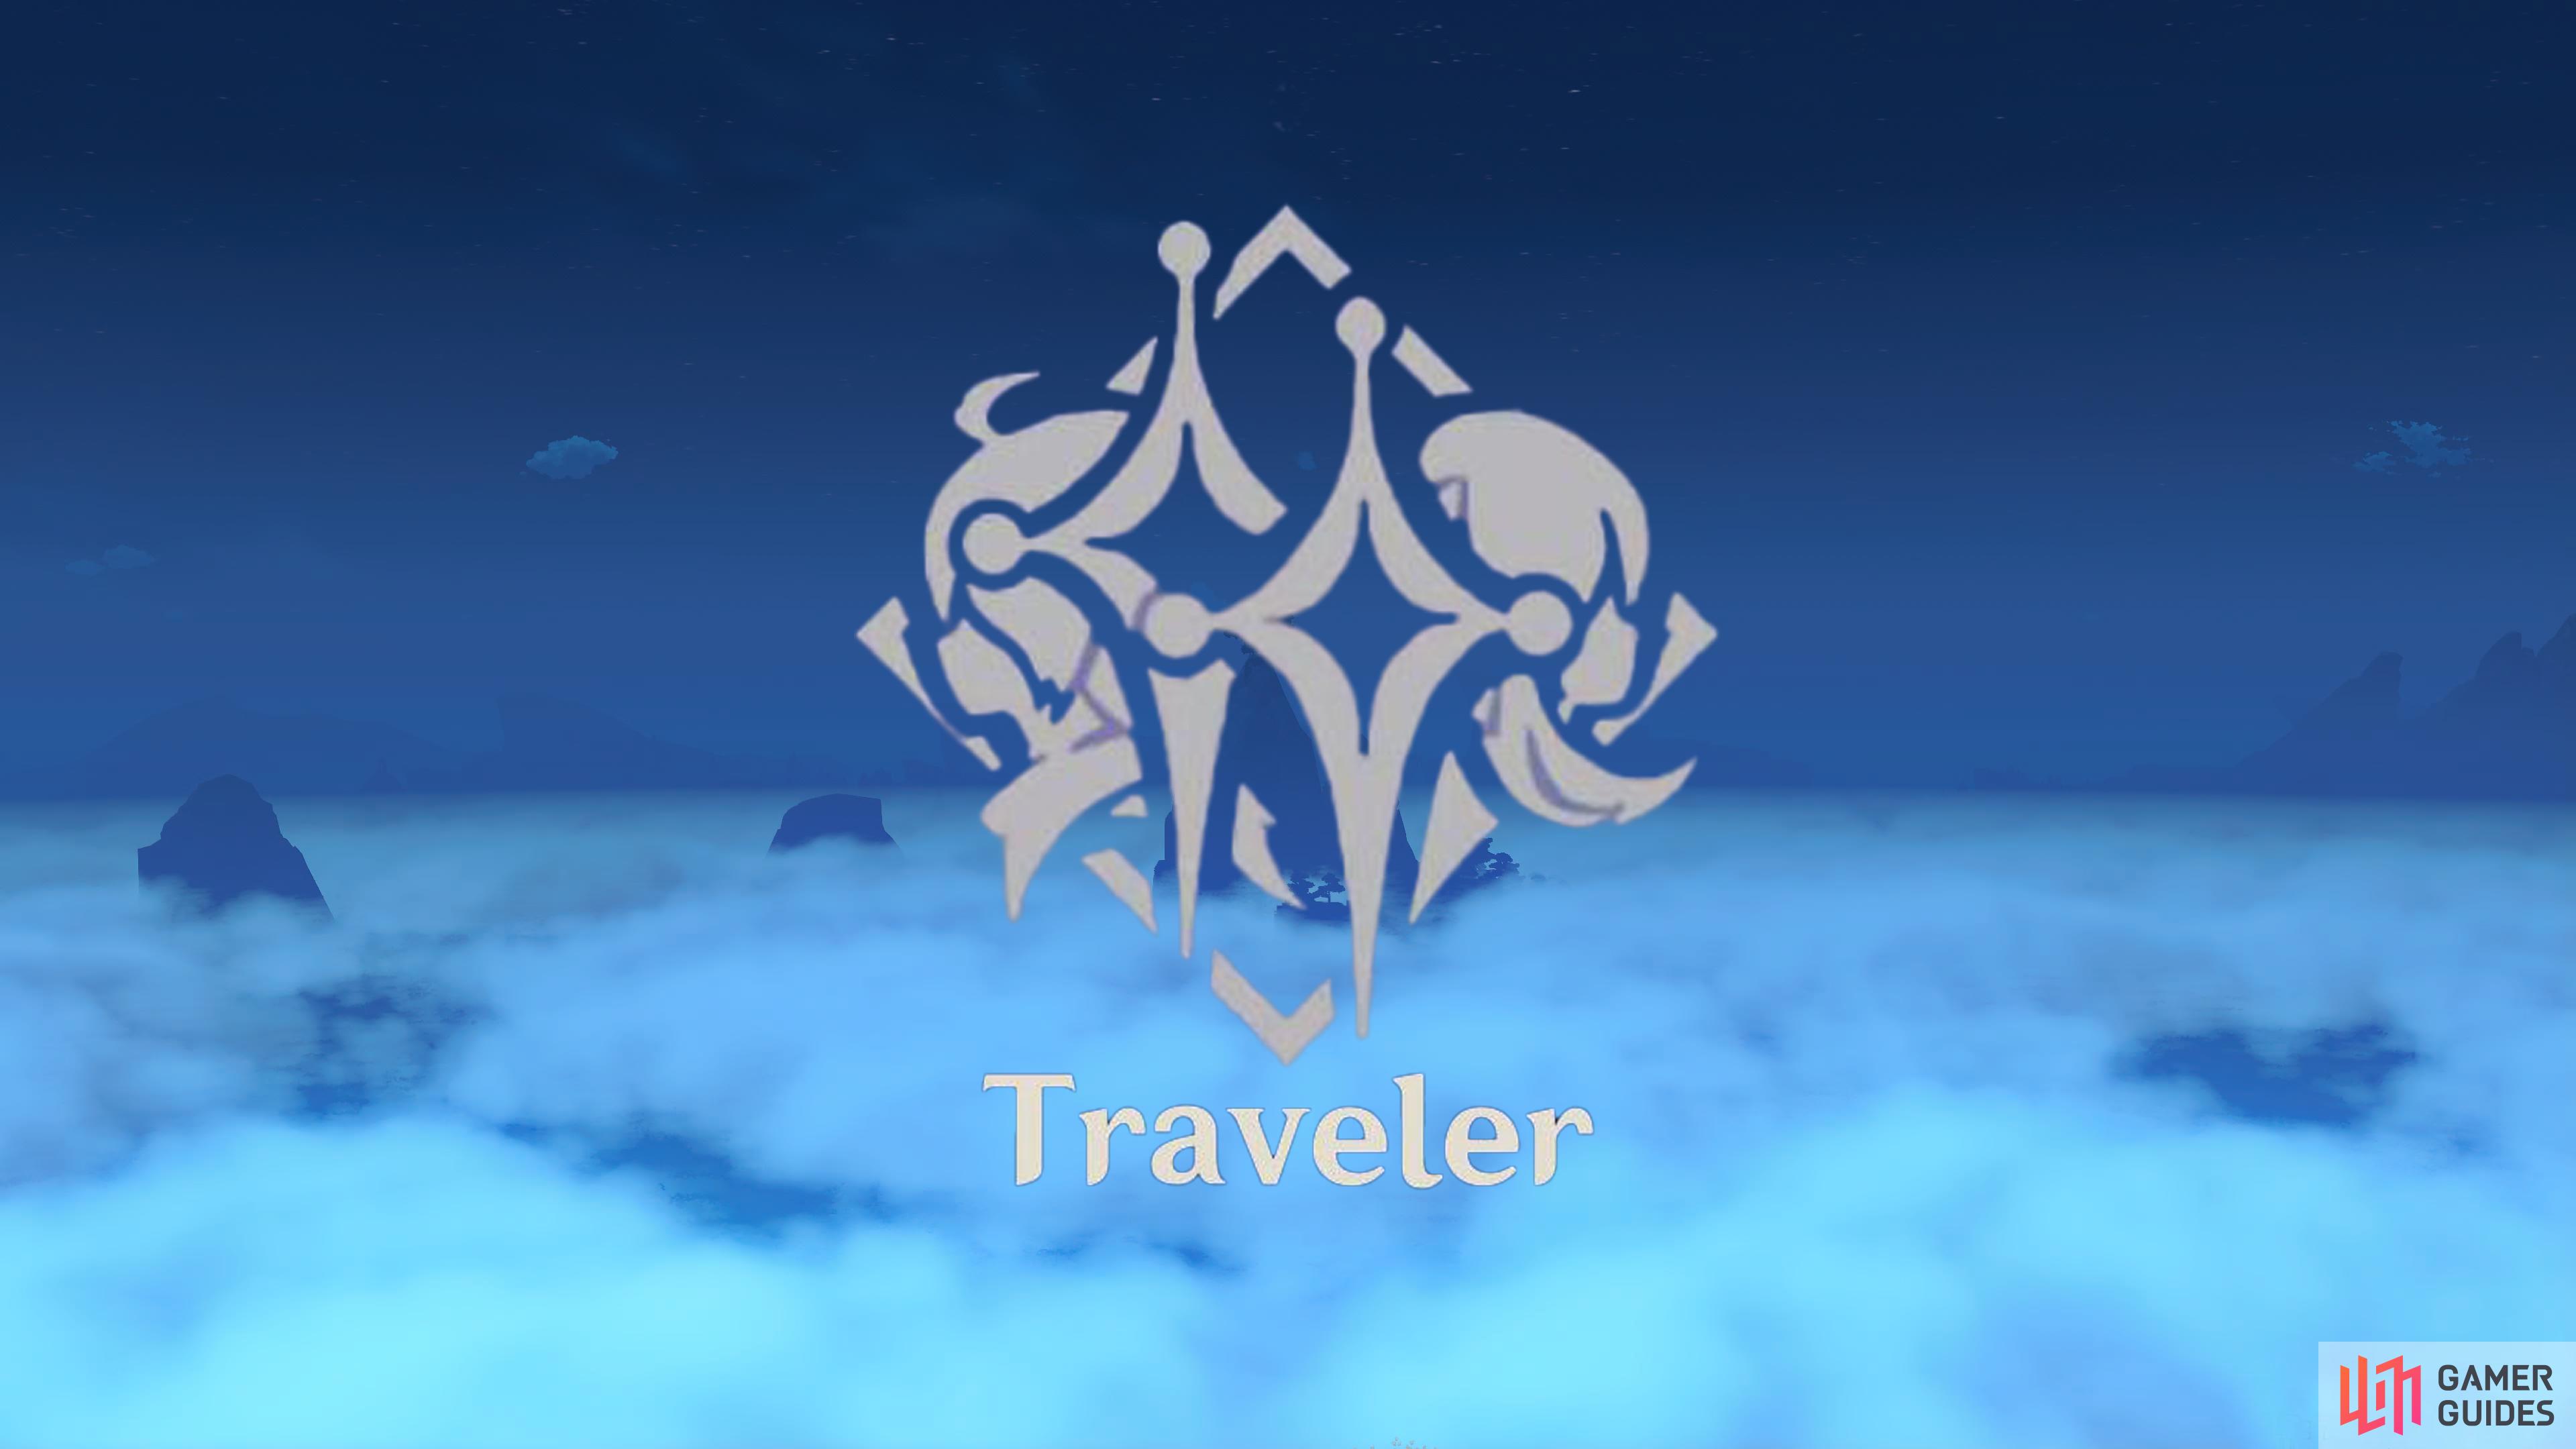 Another Traveler chapter.